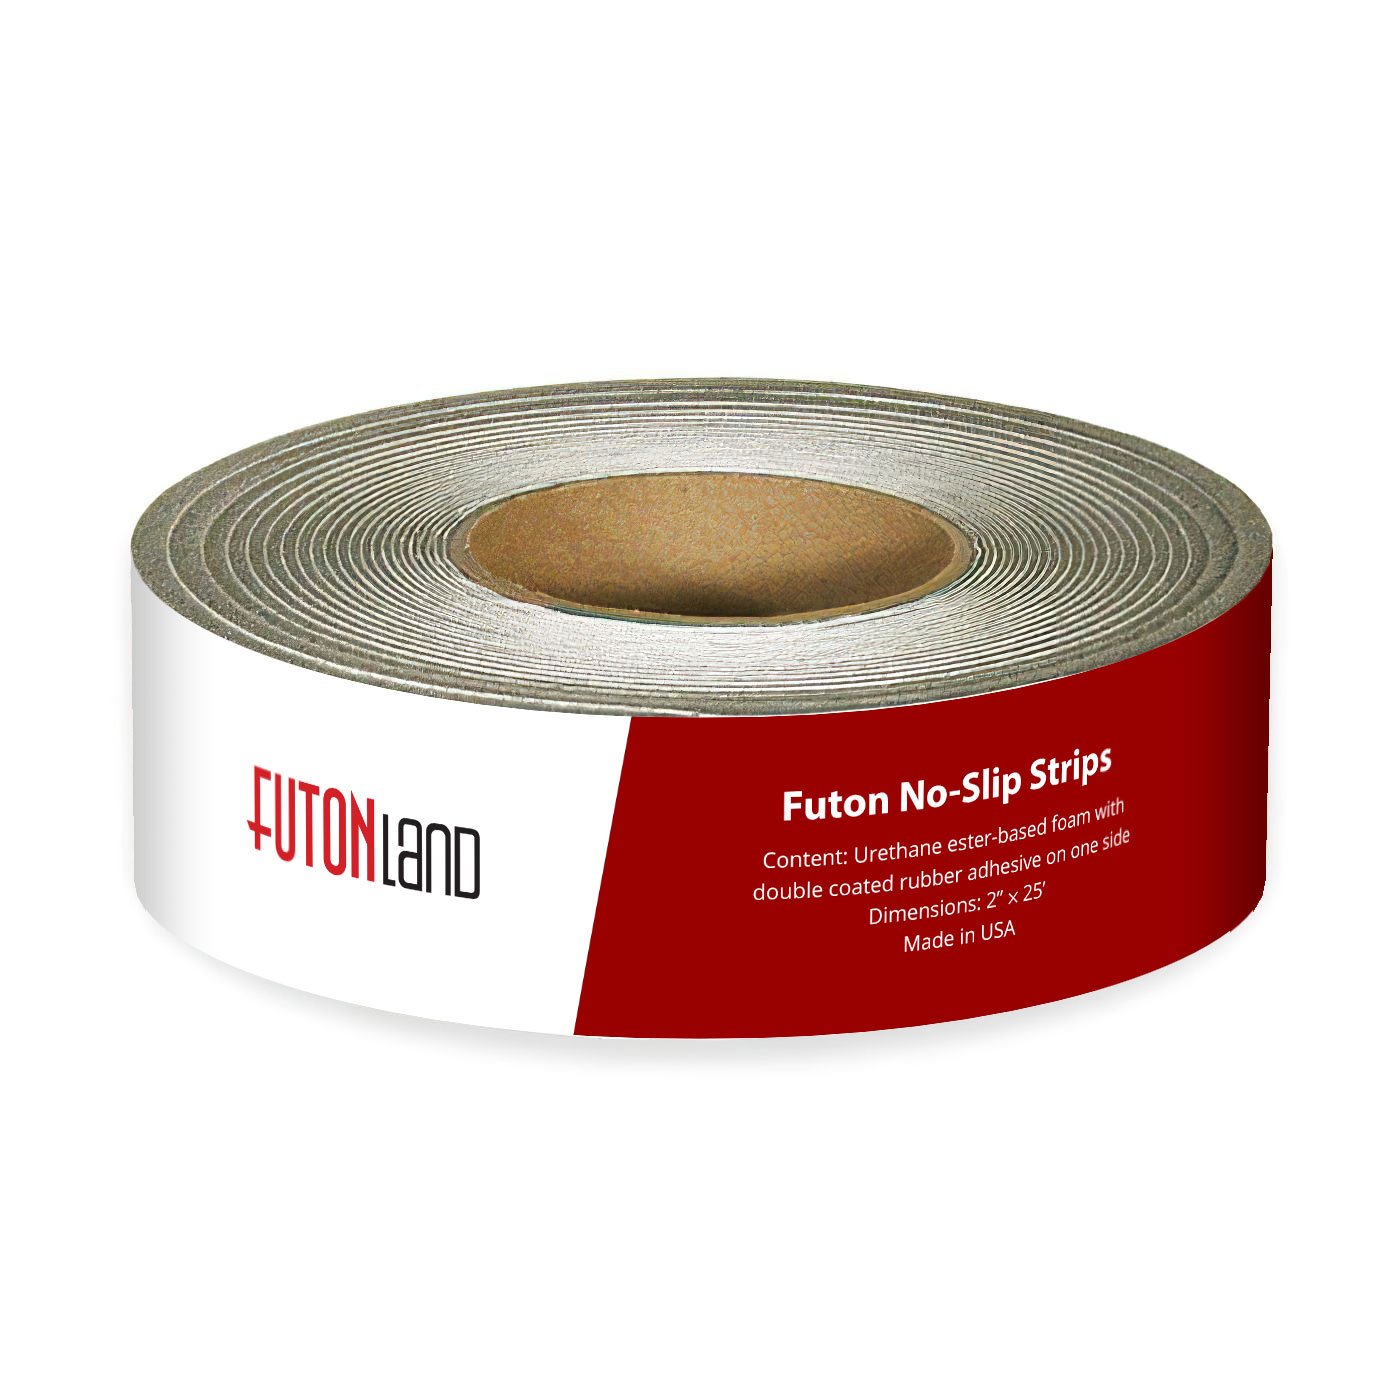 https://futonland.com/common/images/products2/large/FutonStrips-One-2022.jpg